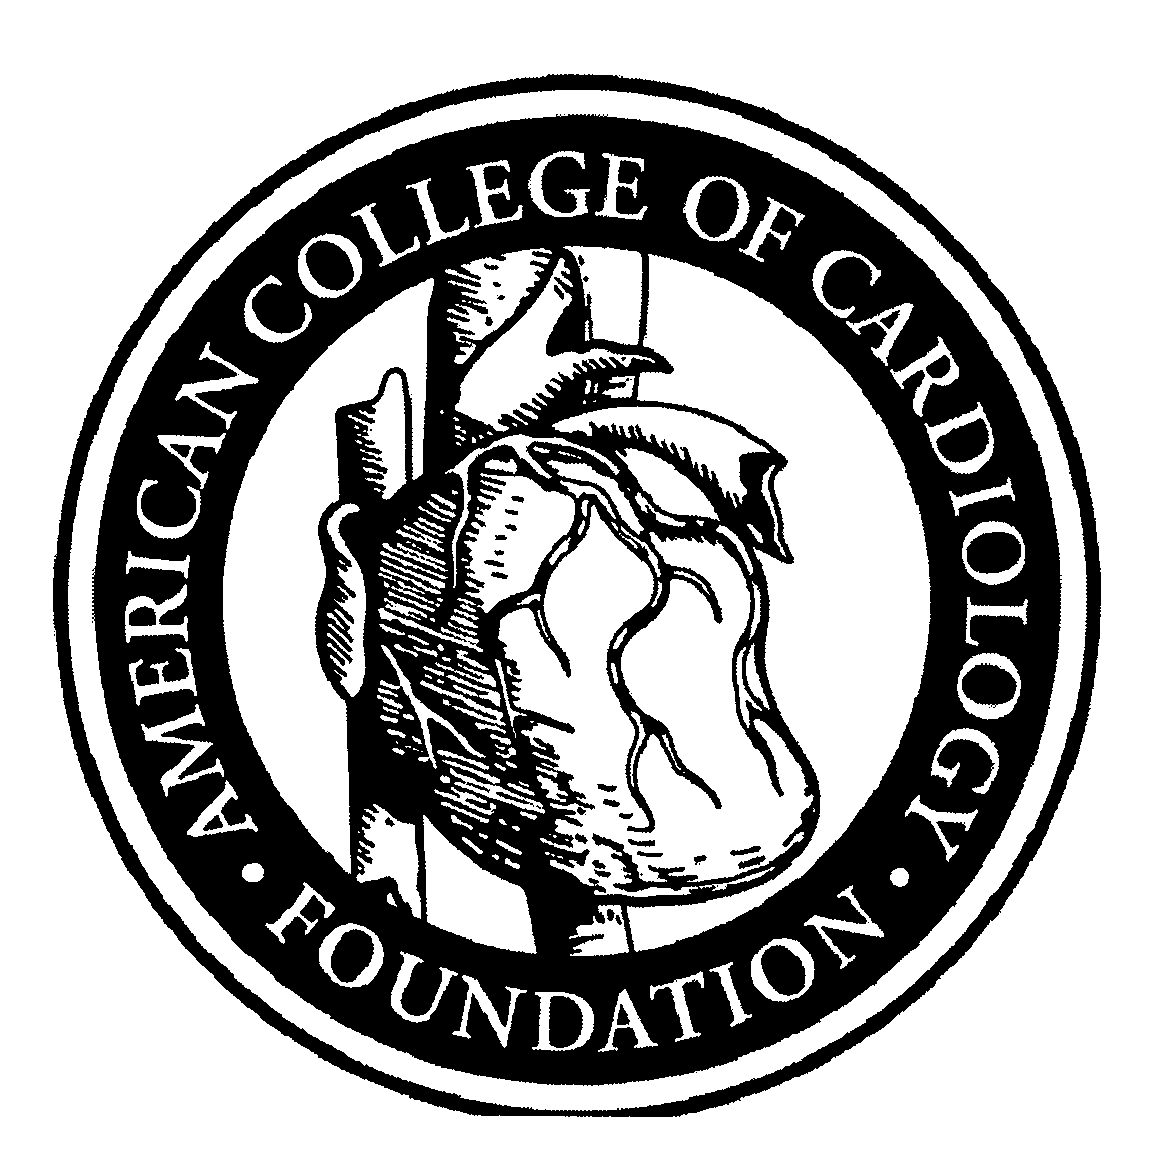  AMERICAN COLLEGE OF CARDIOLOGY FOUNDATION